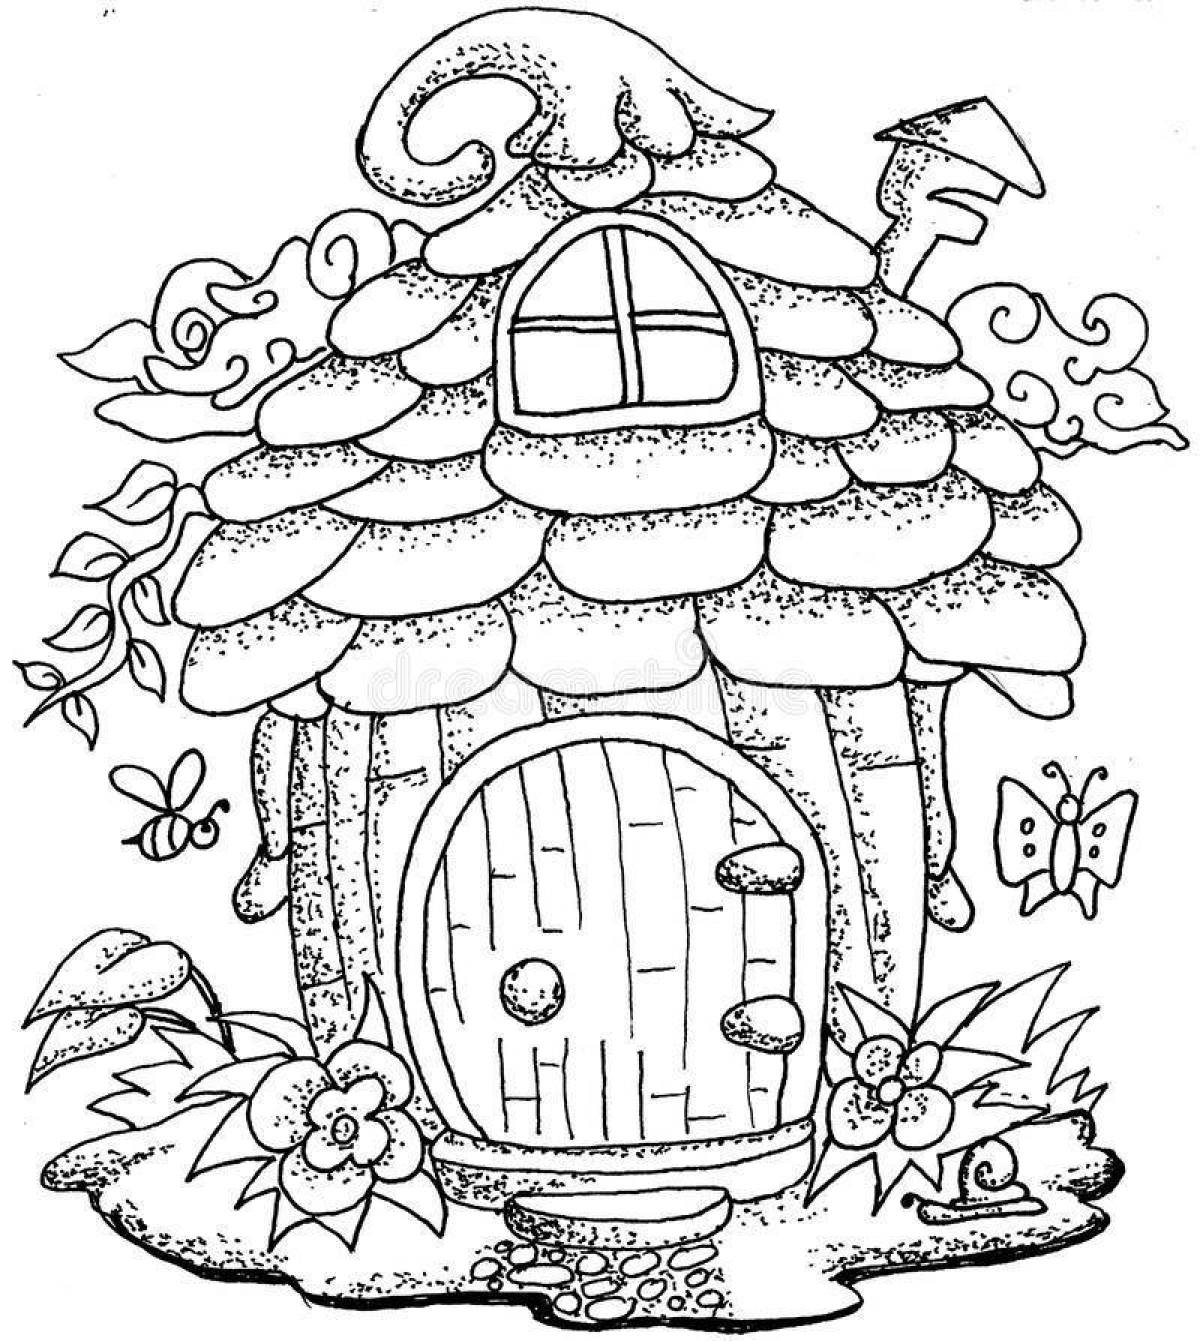 Coloring page dazzling fairy house